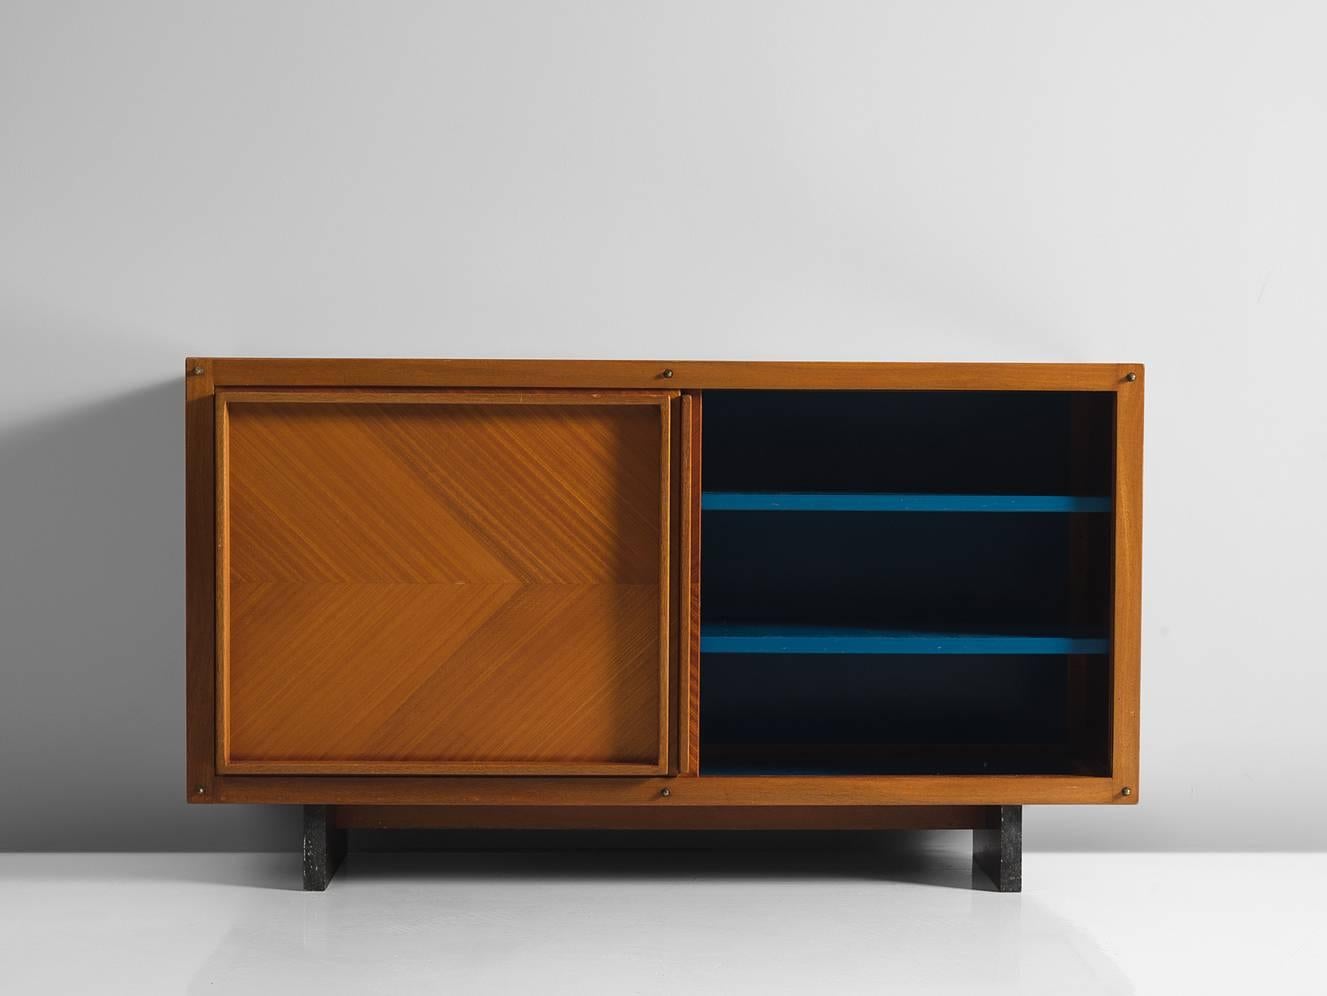 Andre Sornay, cabinet with two sliding doors, mahogany and metal, France, ca. 1958

Small cabinet with two doors that slide open. The design forms a playful and versatile piece of furniture resting on two granite sled bases. Very simple clean